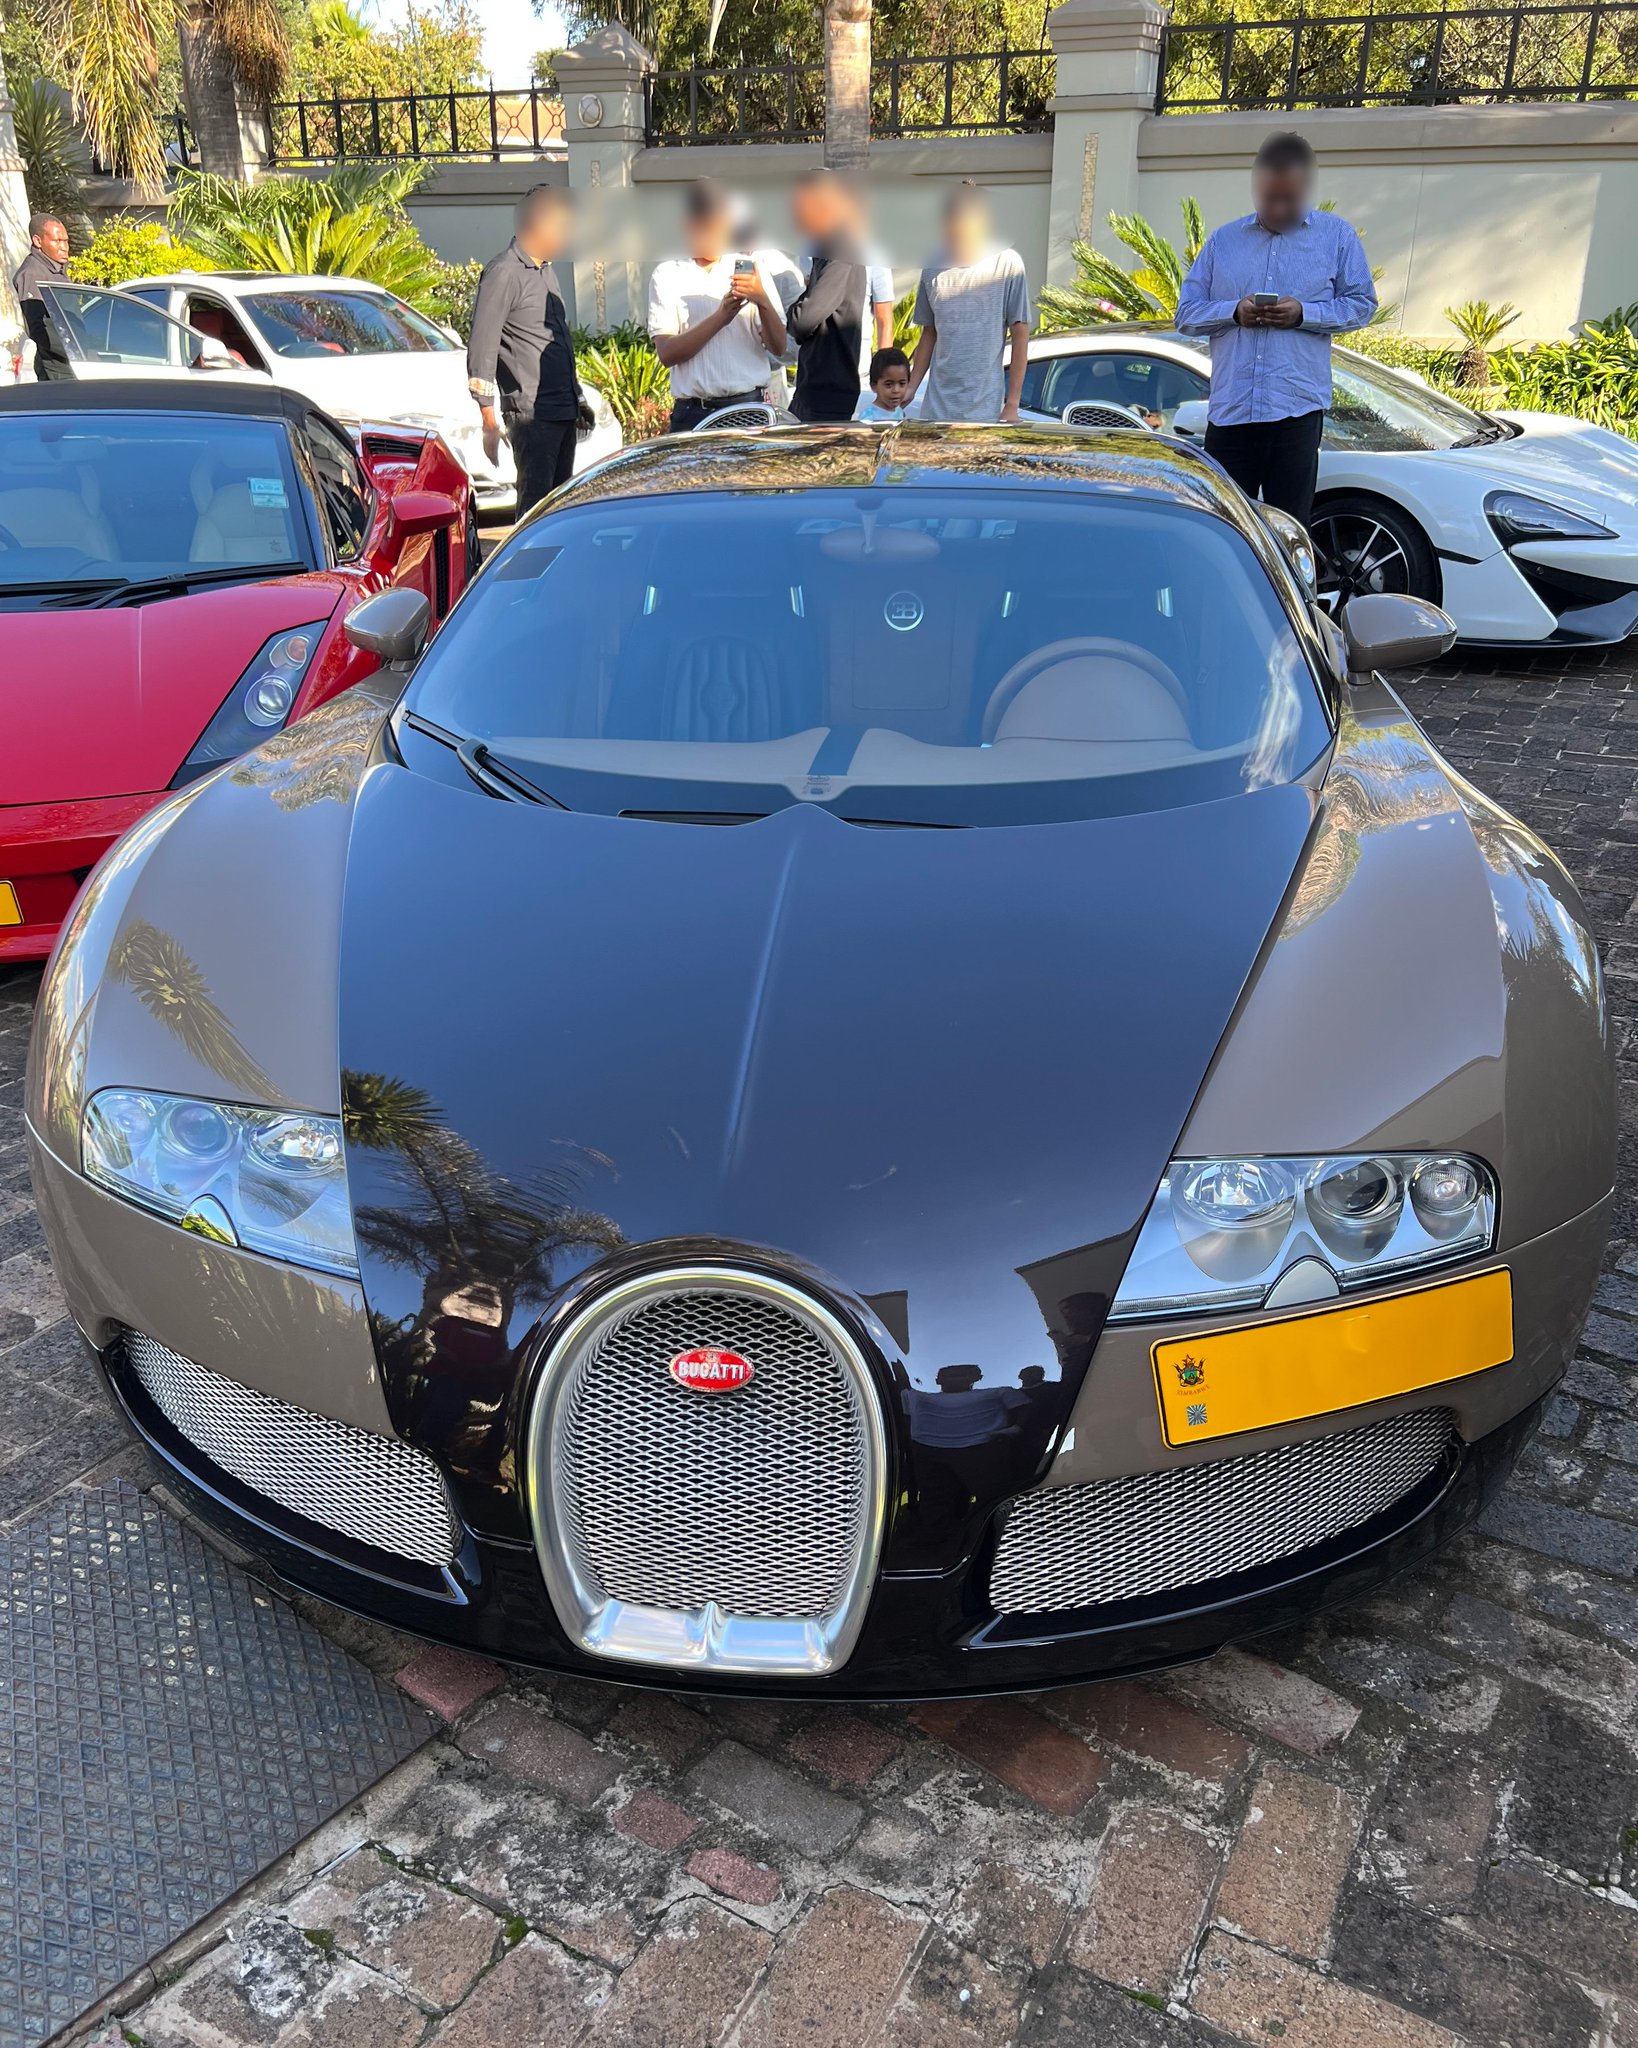 ideal Bugatti that spotted Zero2Turbo for X: up of be transport in \